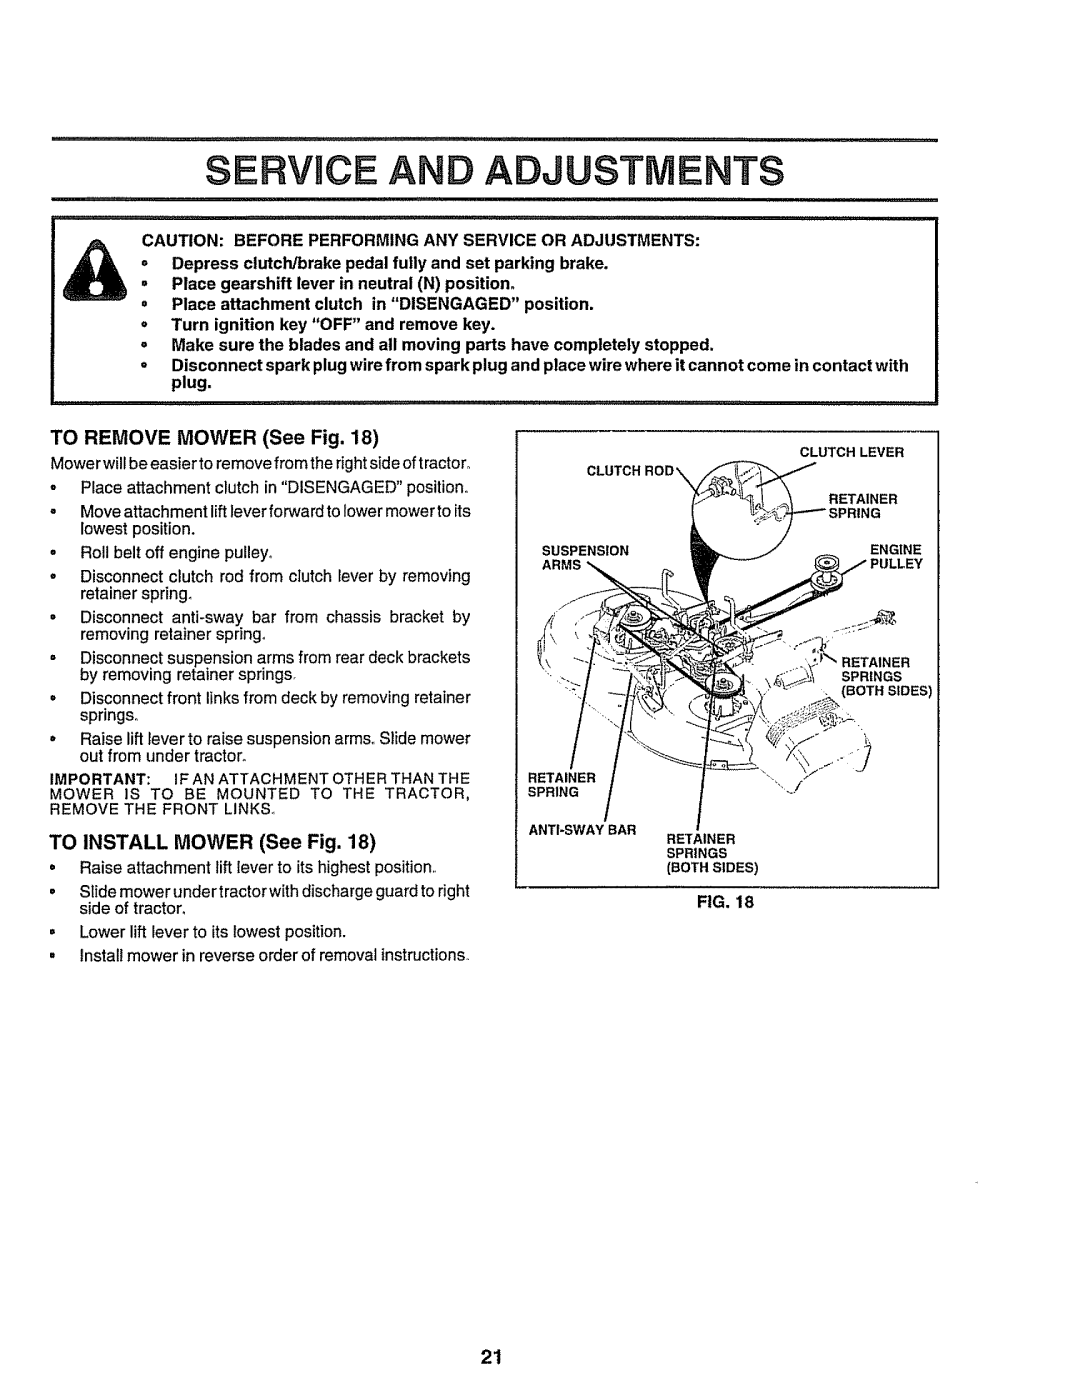 Sears 917.258473 owner manual Service And Adjustments, TO REMOVE MOWER See Fig, TO INSTALL MOWER See Fig 